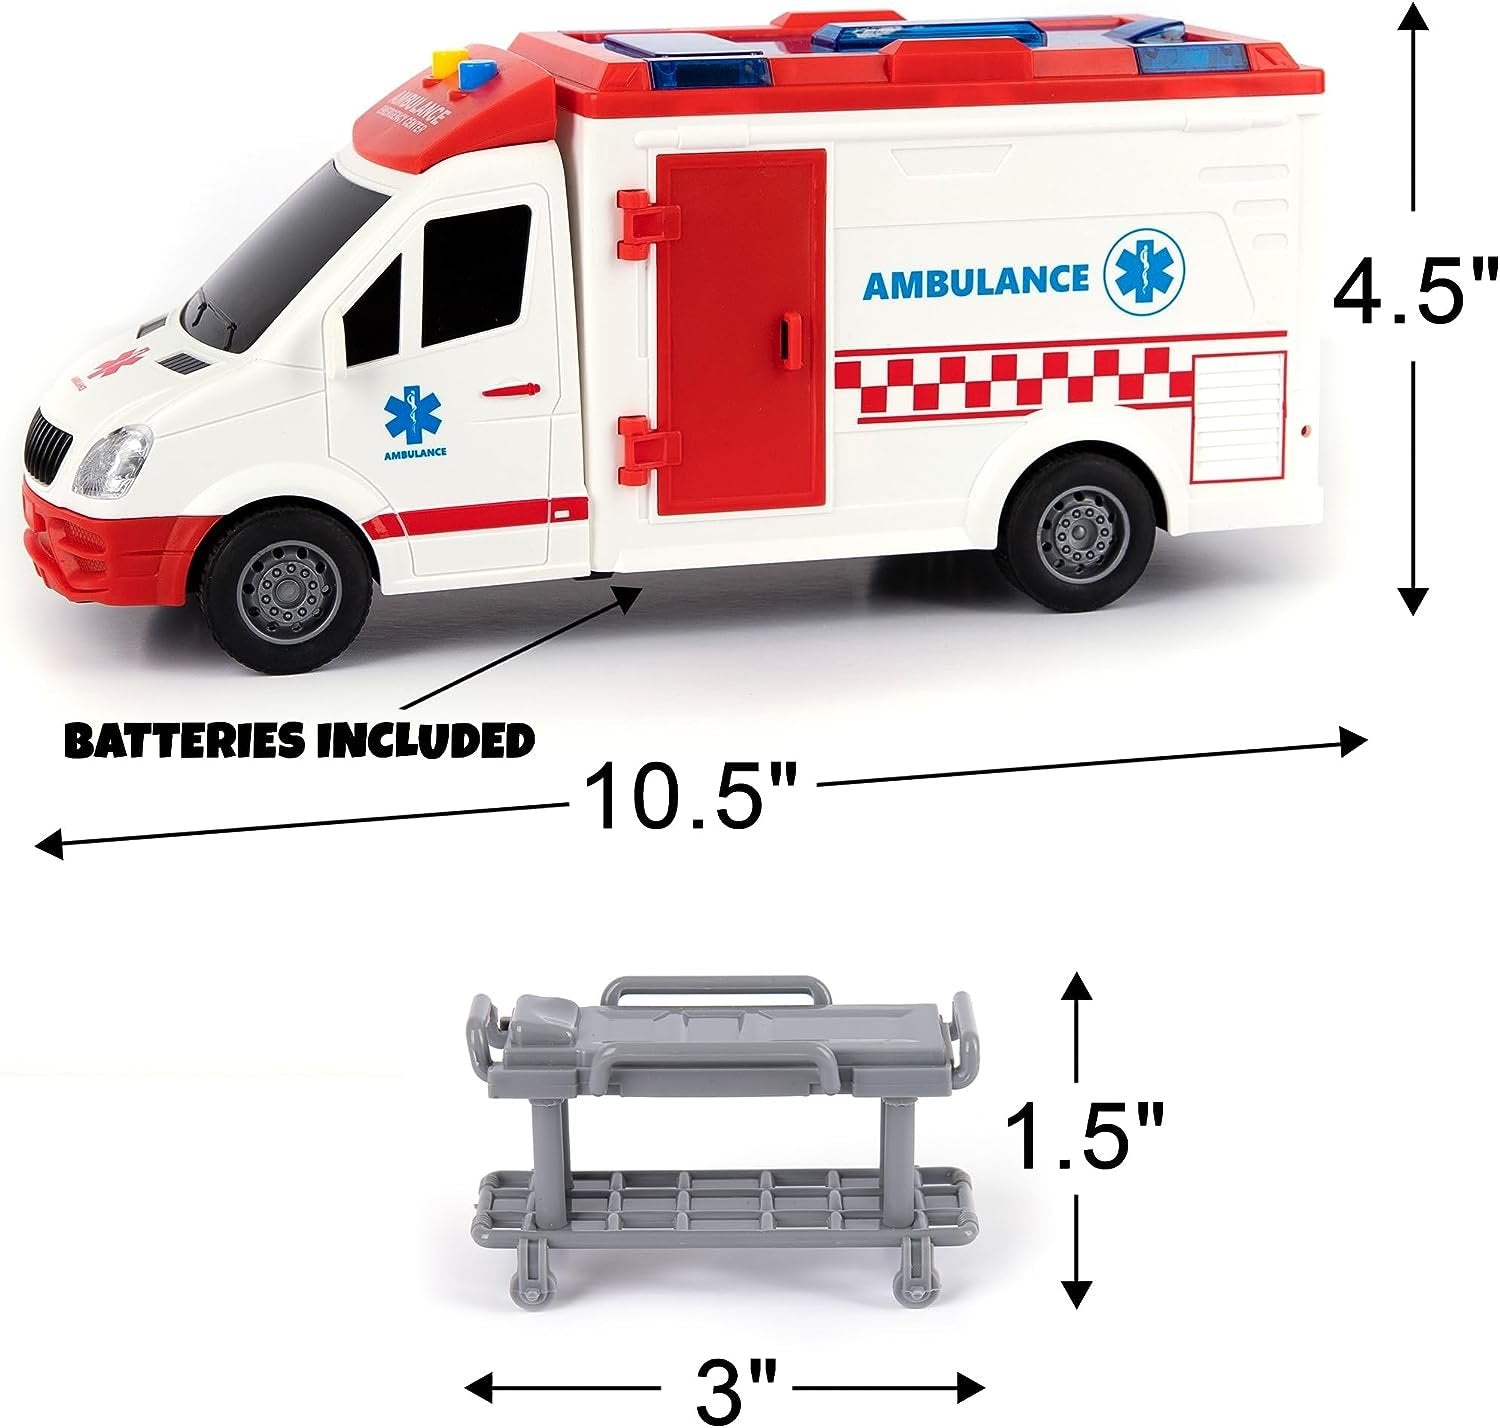 Ambulance Toy Truck for Kids 3,4,5,6,7,8, Lights & Siren, Friction-Powered 1/16 Scale Rescue Toy Ambulance, Emergency Vehicle Toys with Removable Stretcher, Doors Open for Immersive Imagination